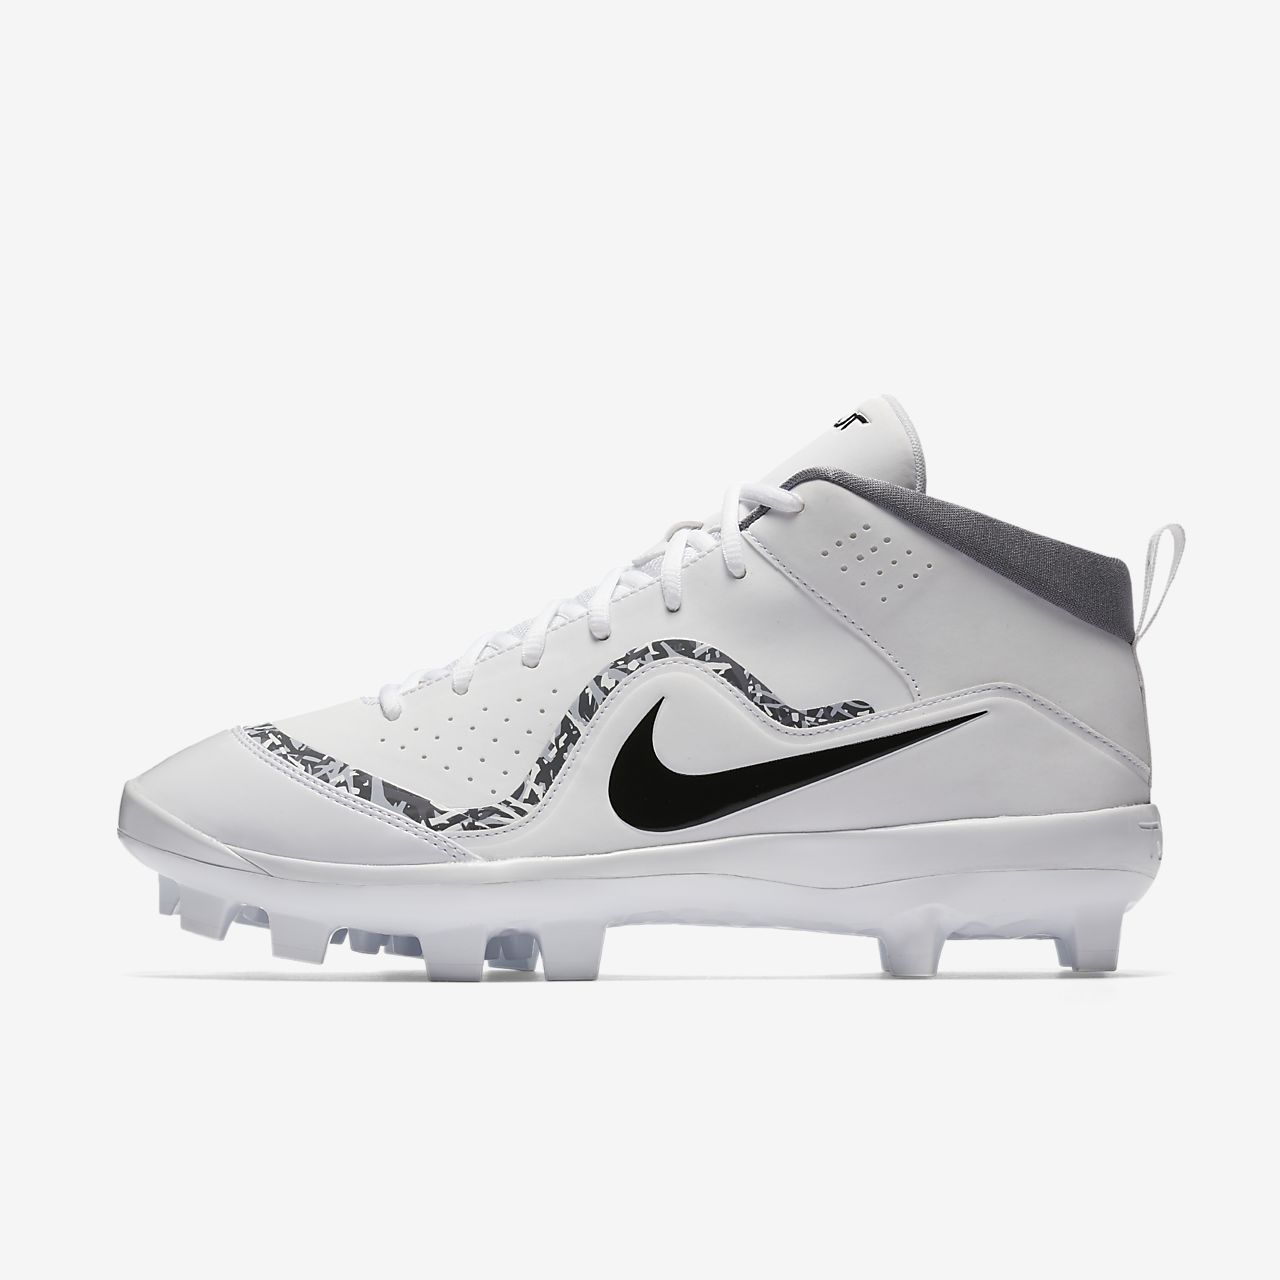 nike cleats baseball air force one low